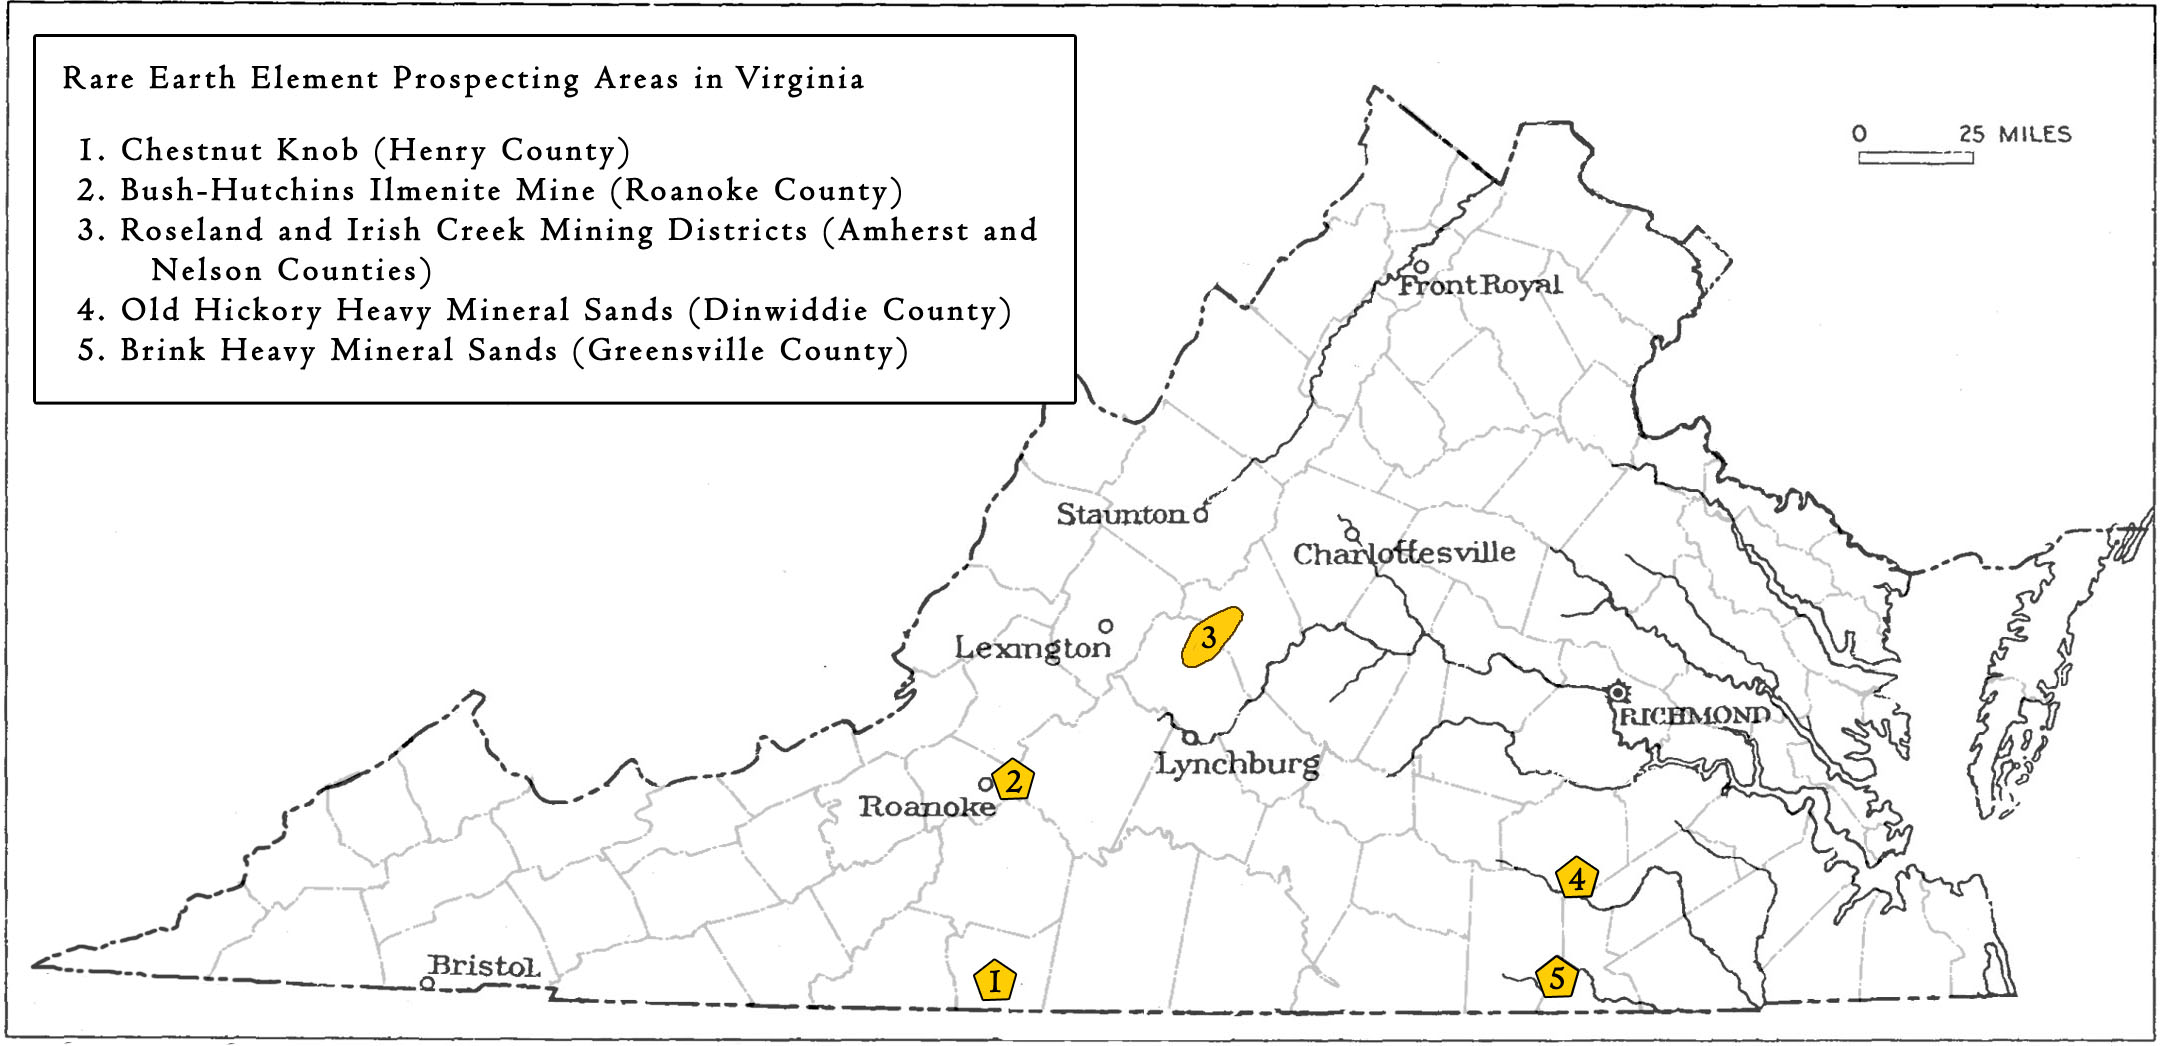 Locations in Virginia mined or prospected for REE